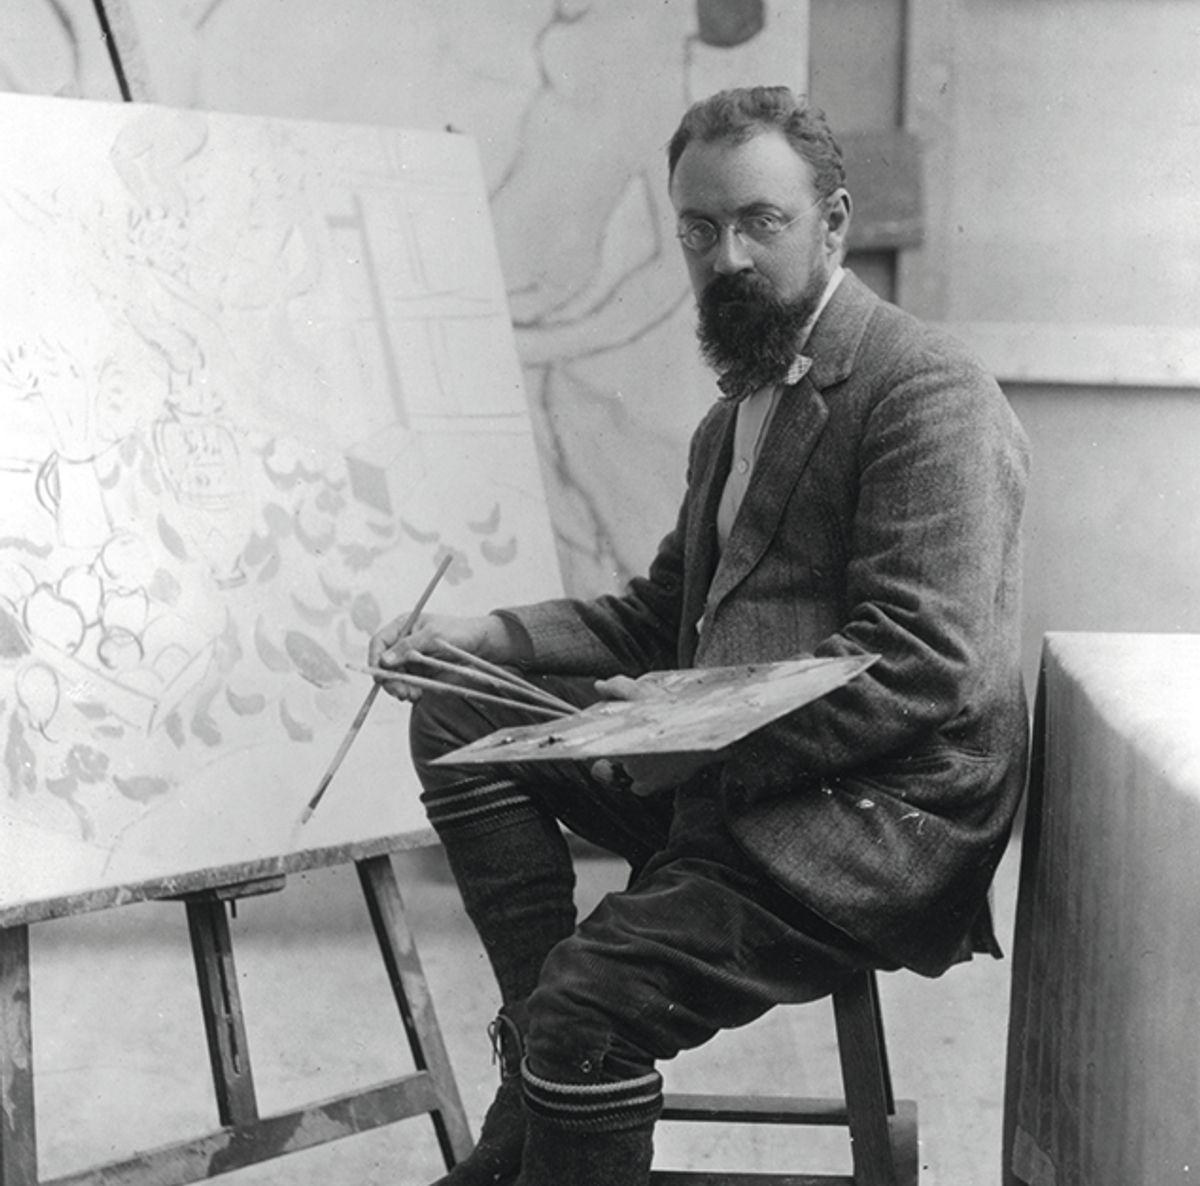 French artist #HenriMatisse died from a heart attack #onthisday in 1954. 🎨 #painter #sculptor #printmaker #draughtsman #art #drawing #painting #collage #Fauvism #Modernism #trivia #PostImpressionism